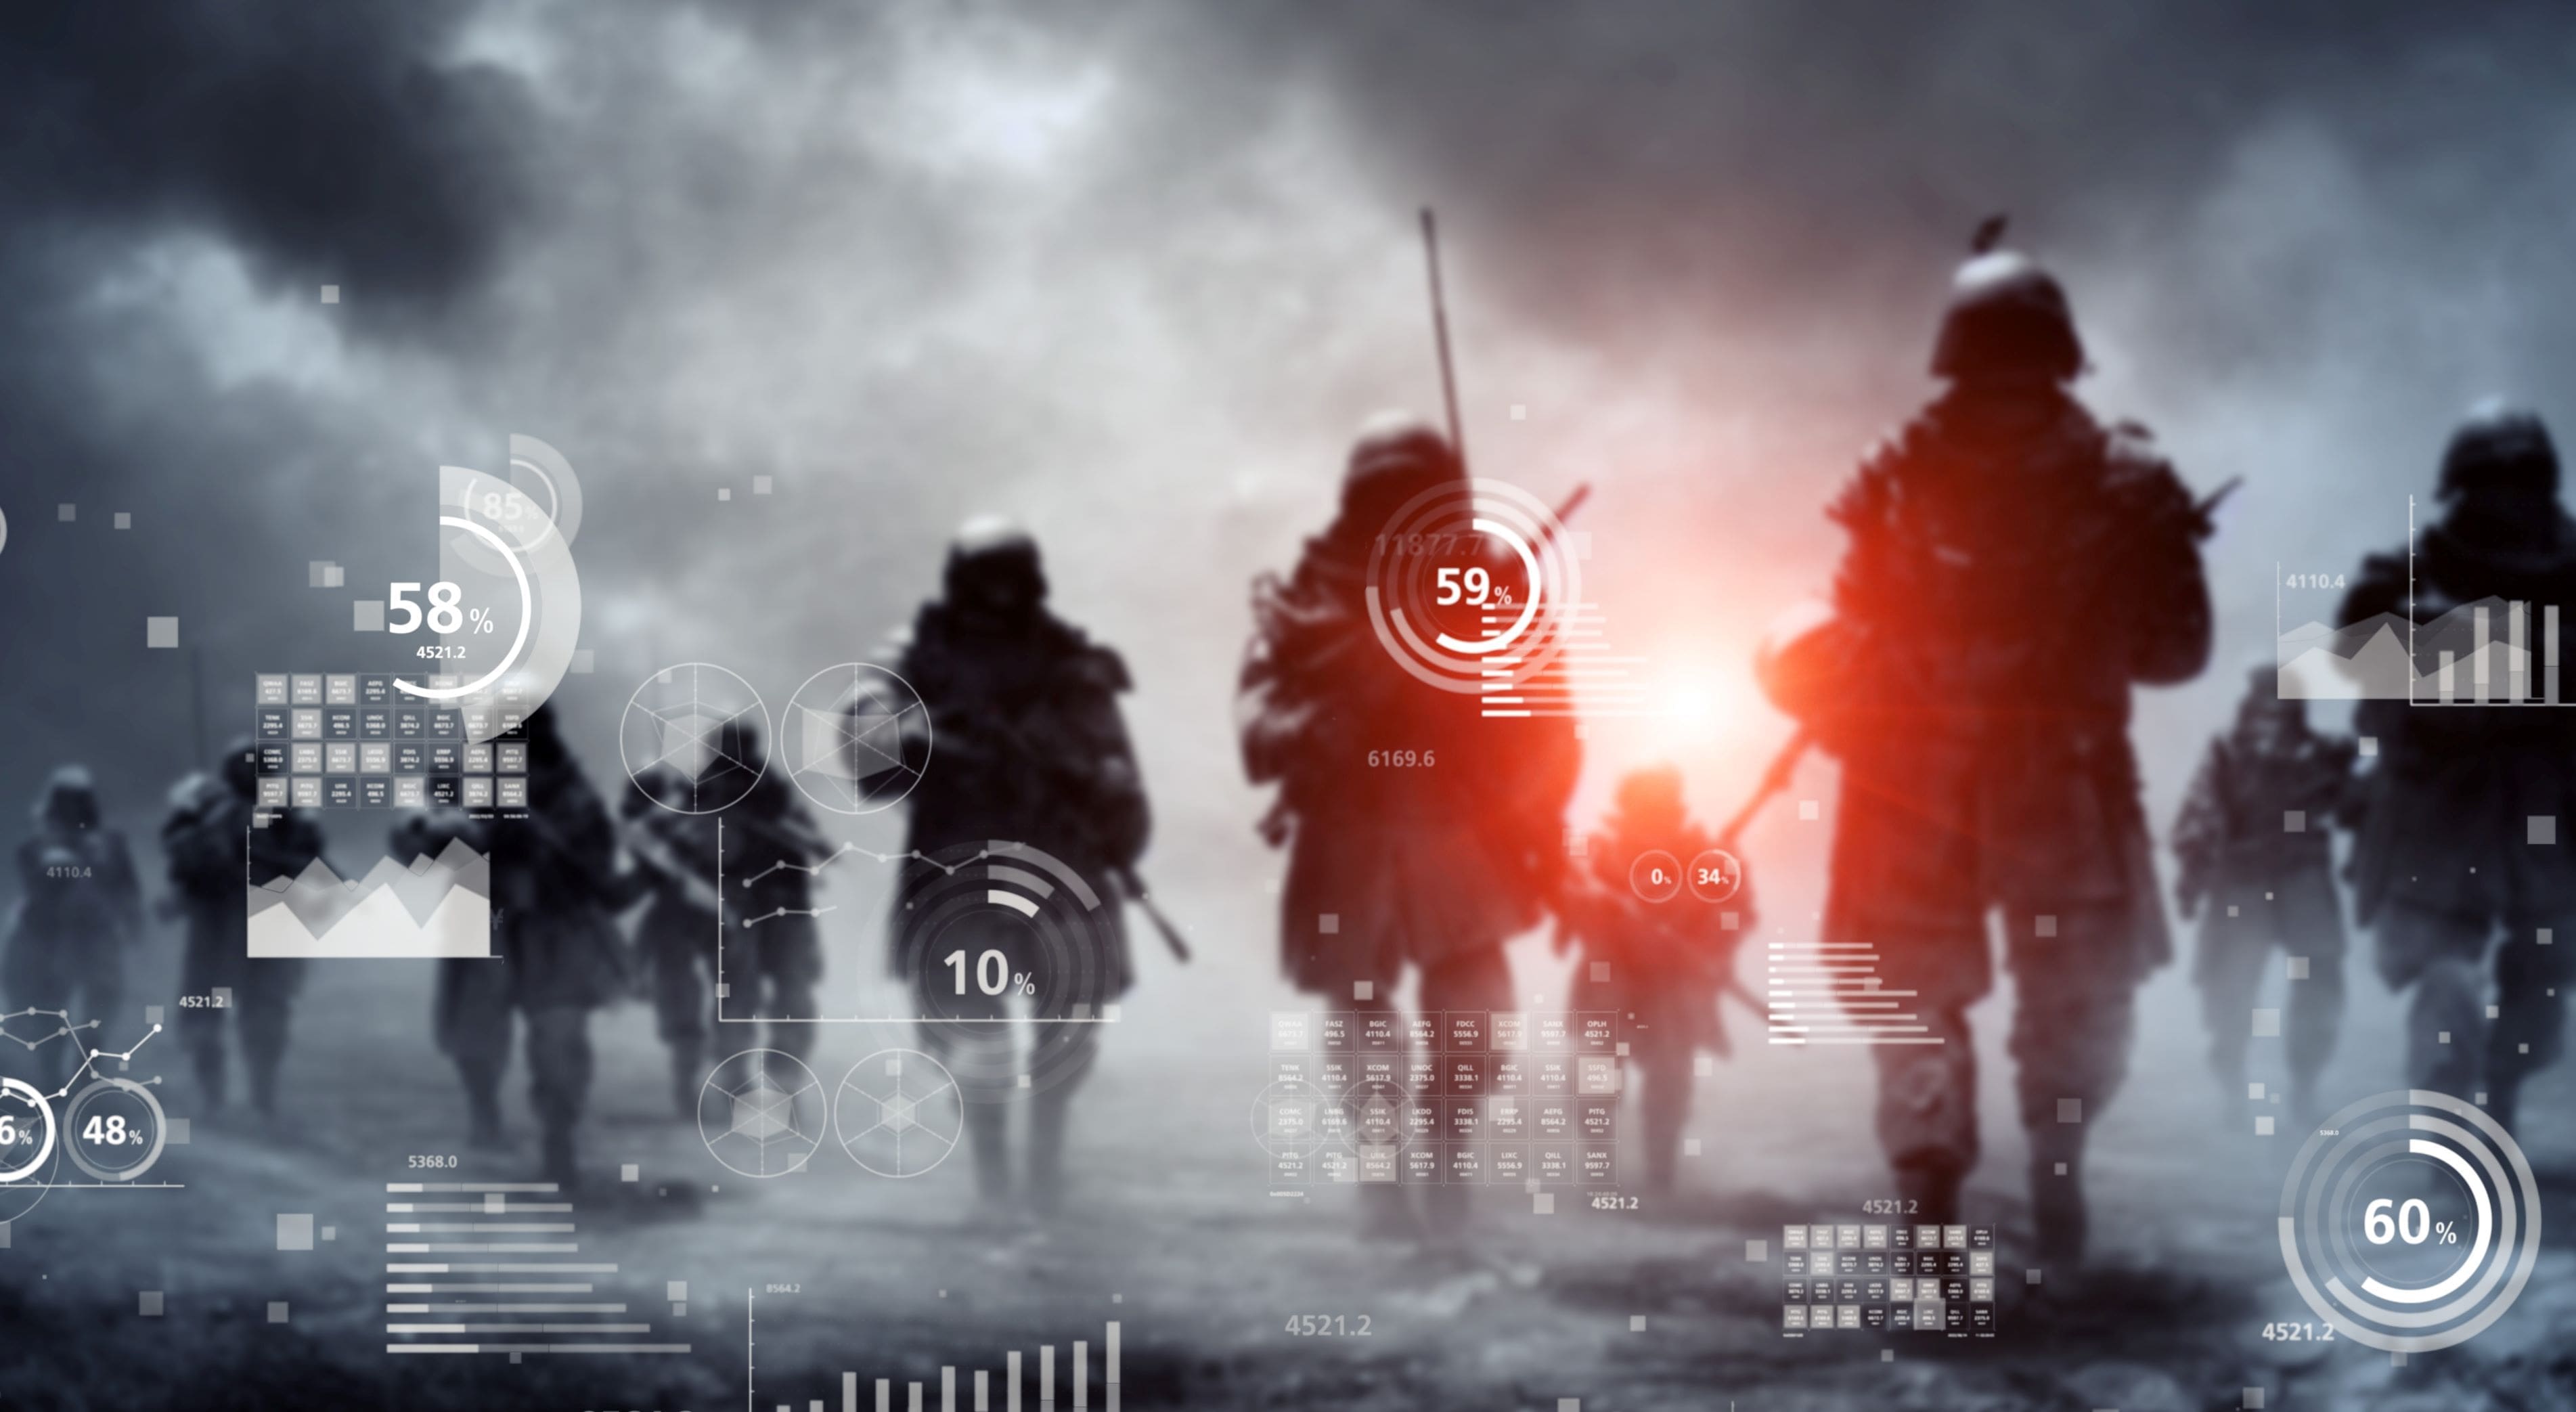 A group of soldiers advancing through a smoky battlefield overlaid with futuristic digital interface elements, showcasing AI trends in military tactics.